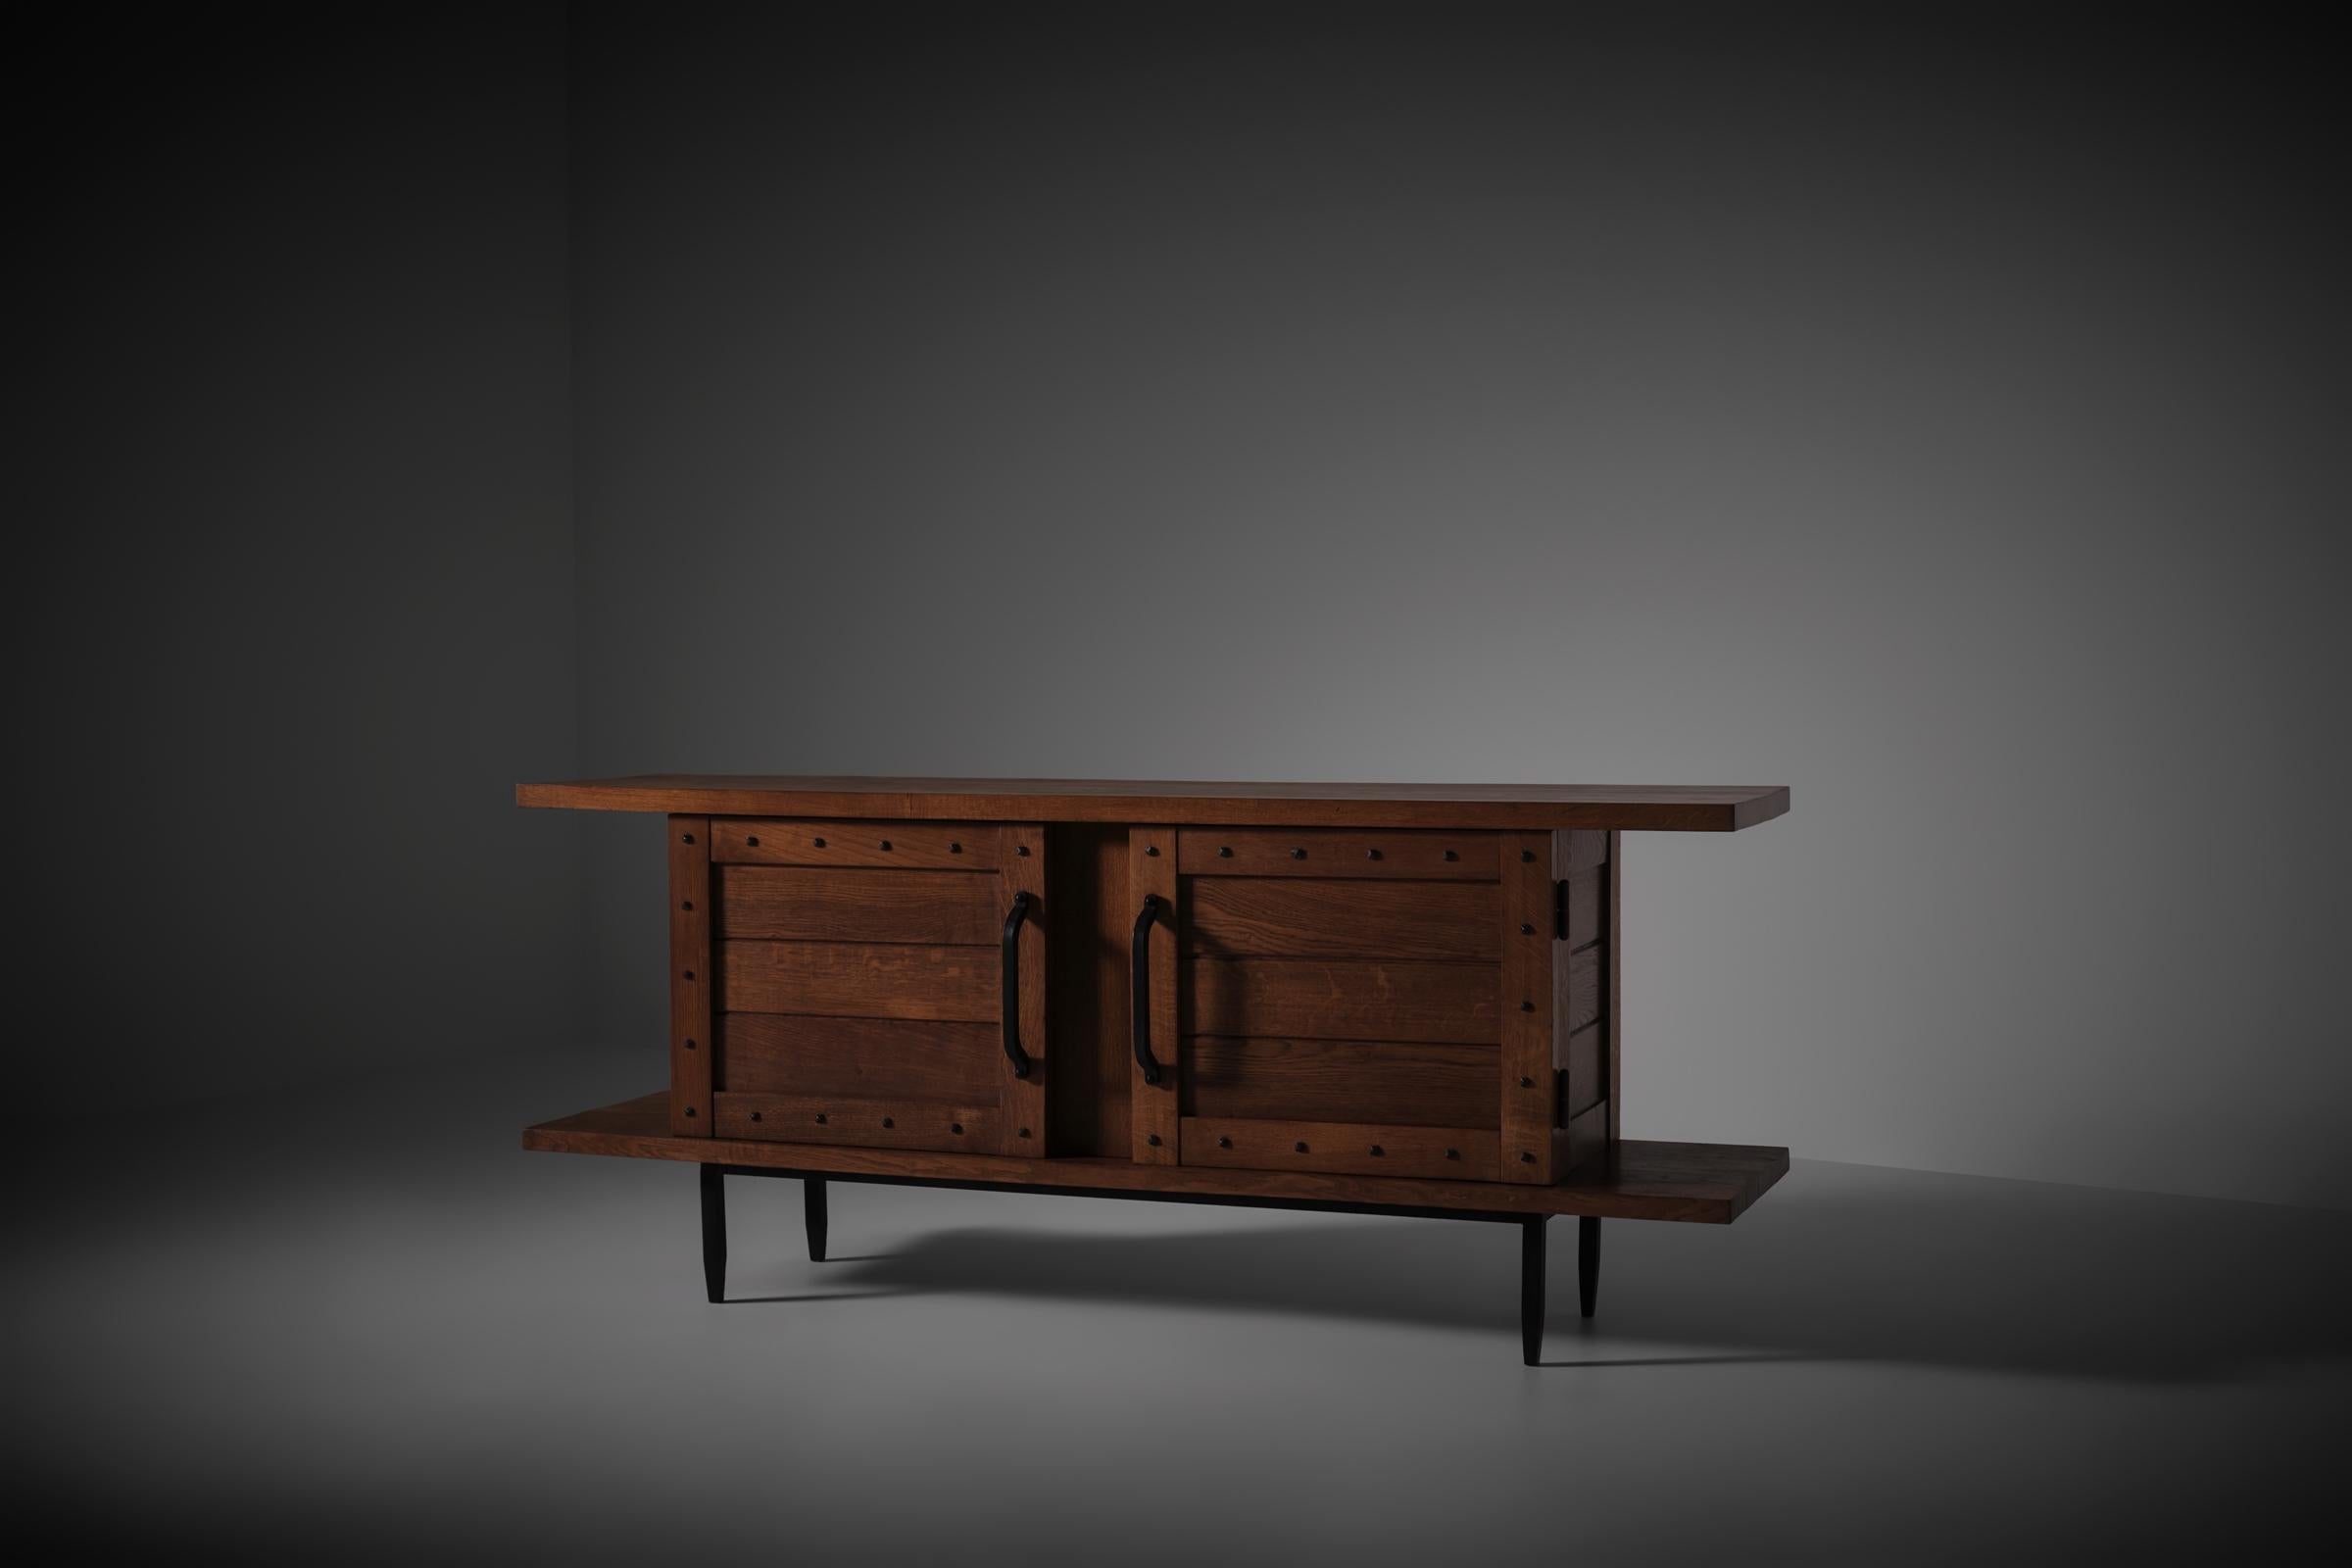 Rare sideboard in solid Oak and wrought Iron by Jean Touret & Les Artisans de Marolles, France 1950s. Clean and modest lines made from raw and honest materials such as solid French Oak and wrought iron, showcasing the philosophy of Jean Touret.